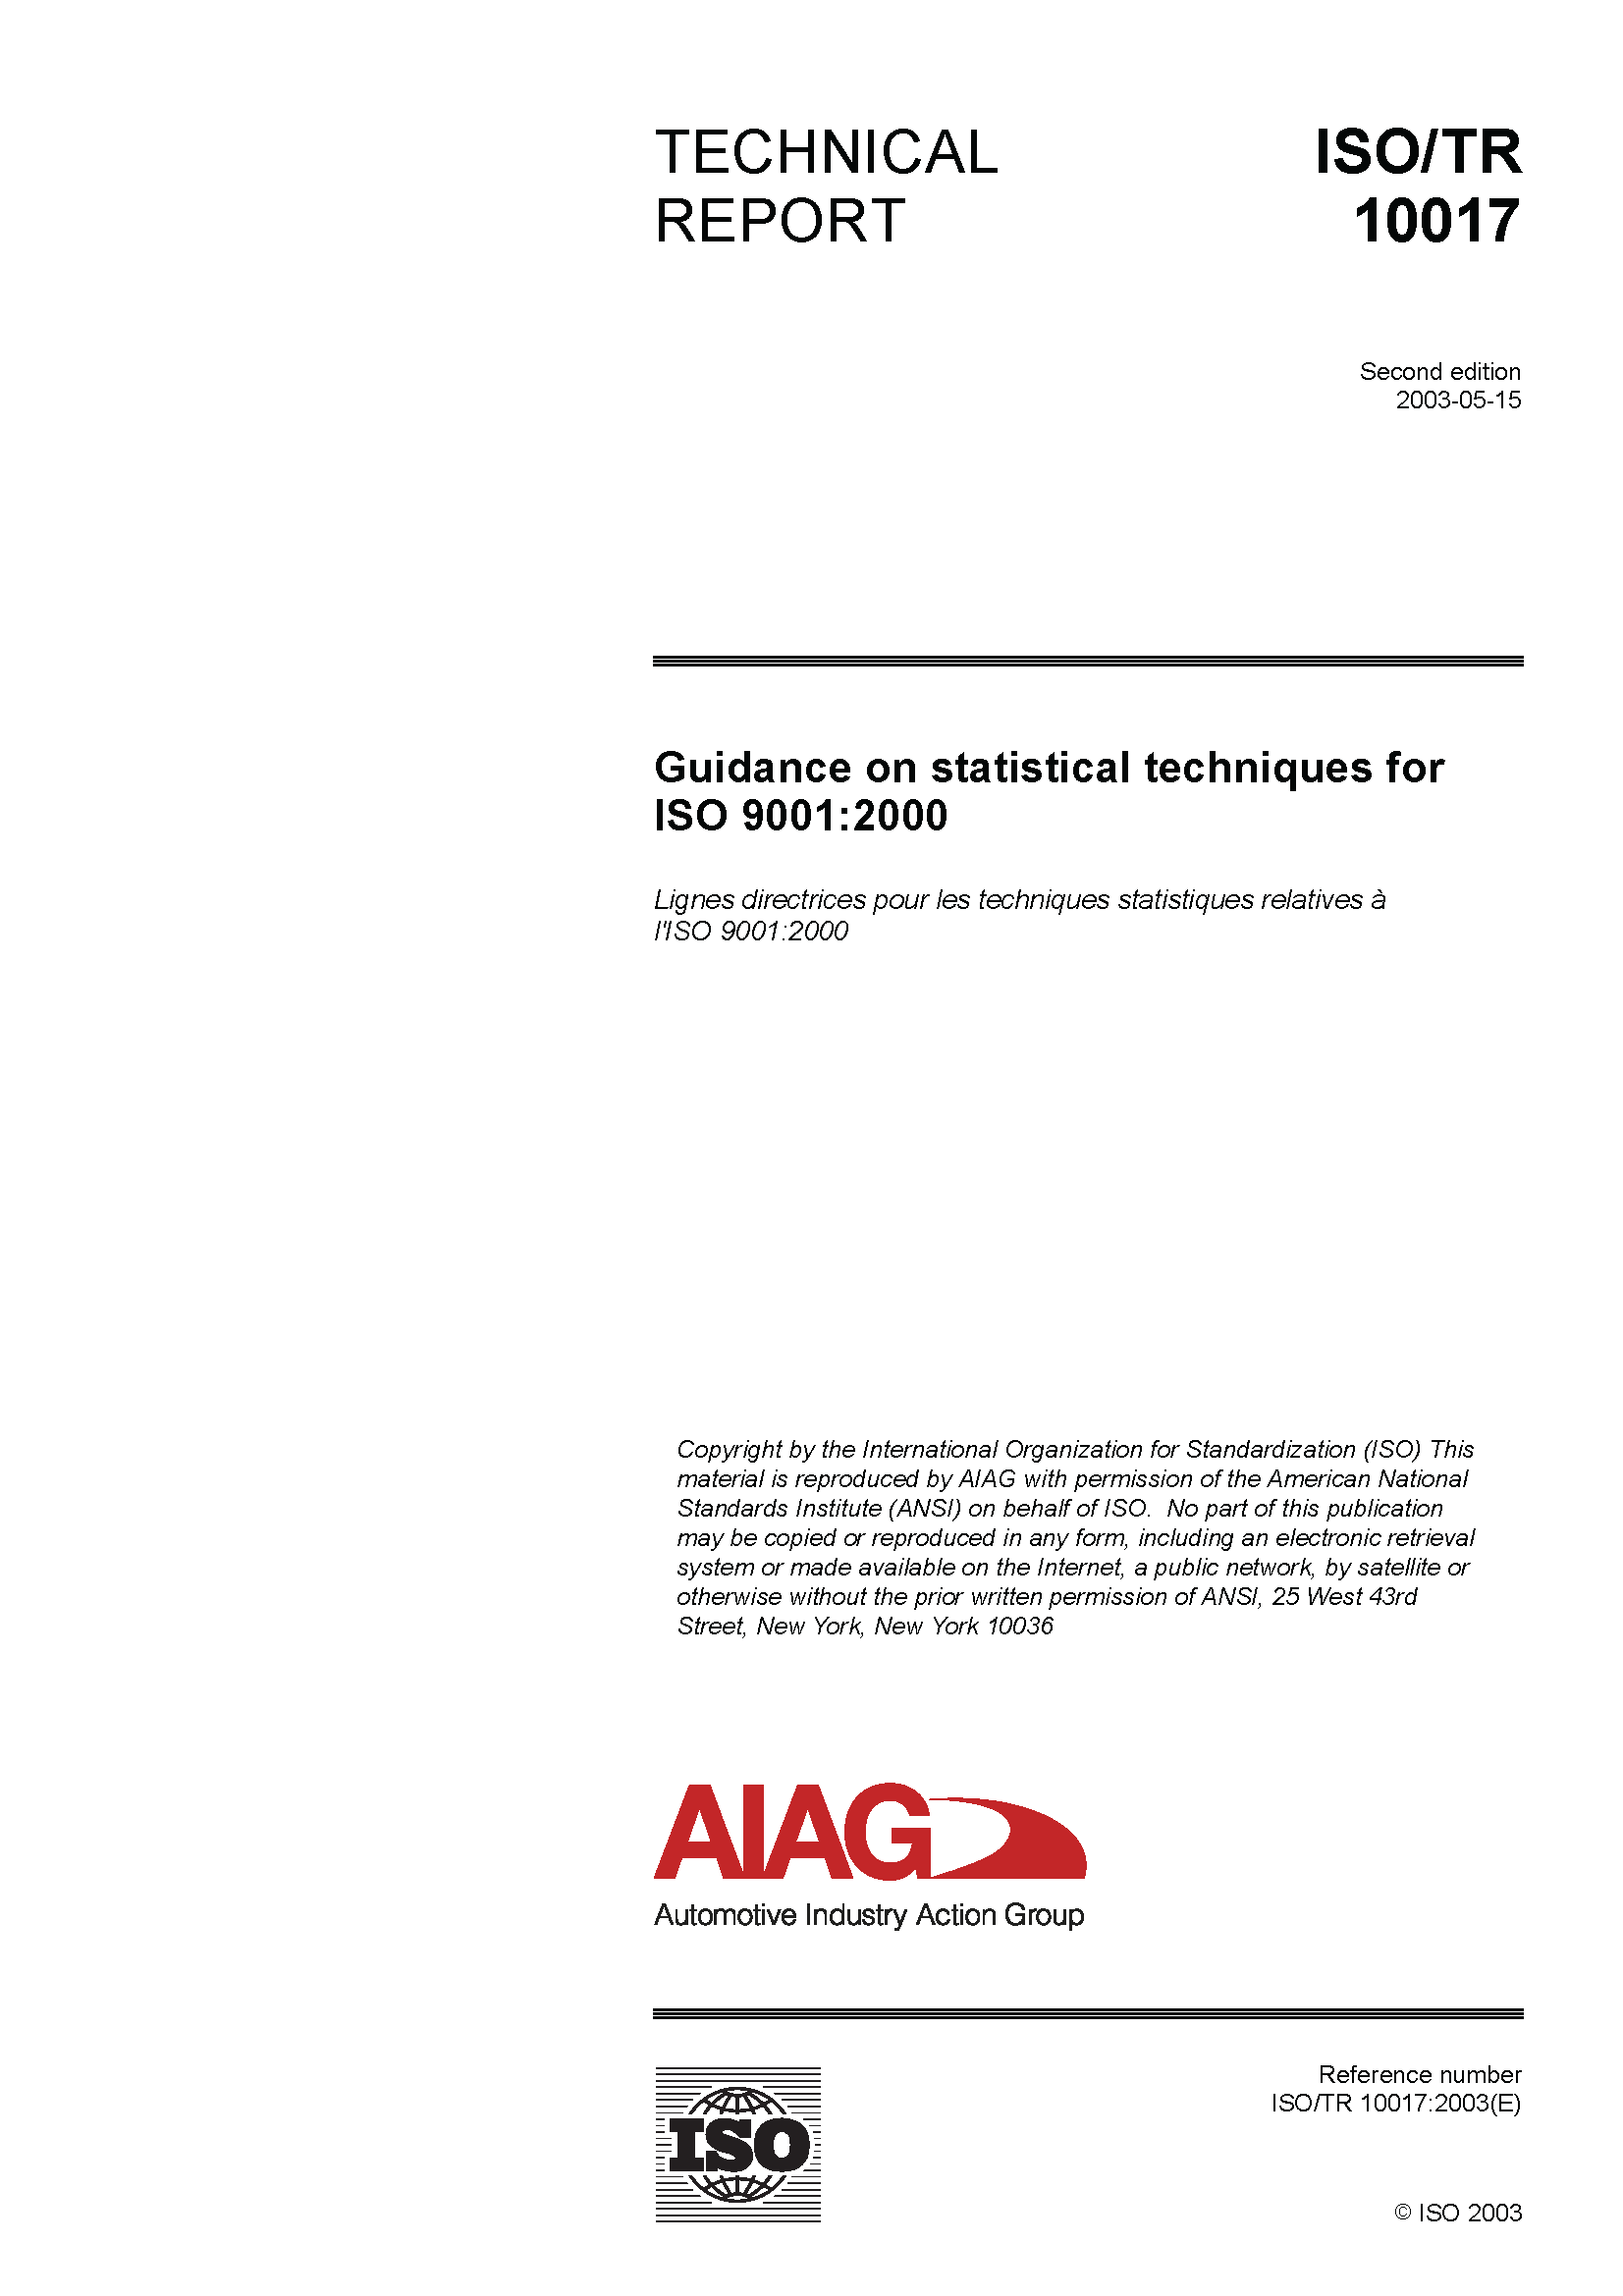 Publikation AIAG Guidance on Statistical Techniques for ISO 9001:2000 1.5.2003 Ansicht